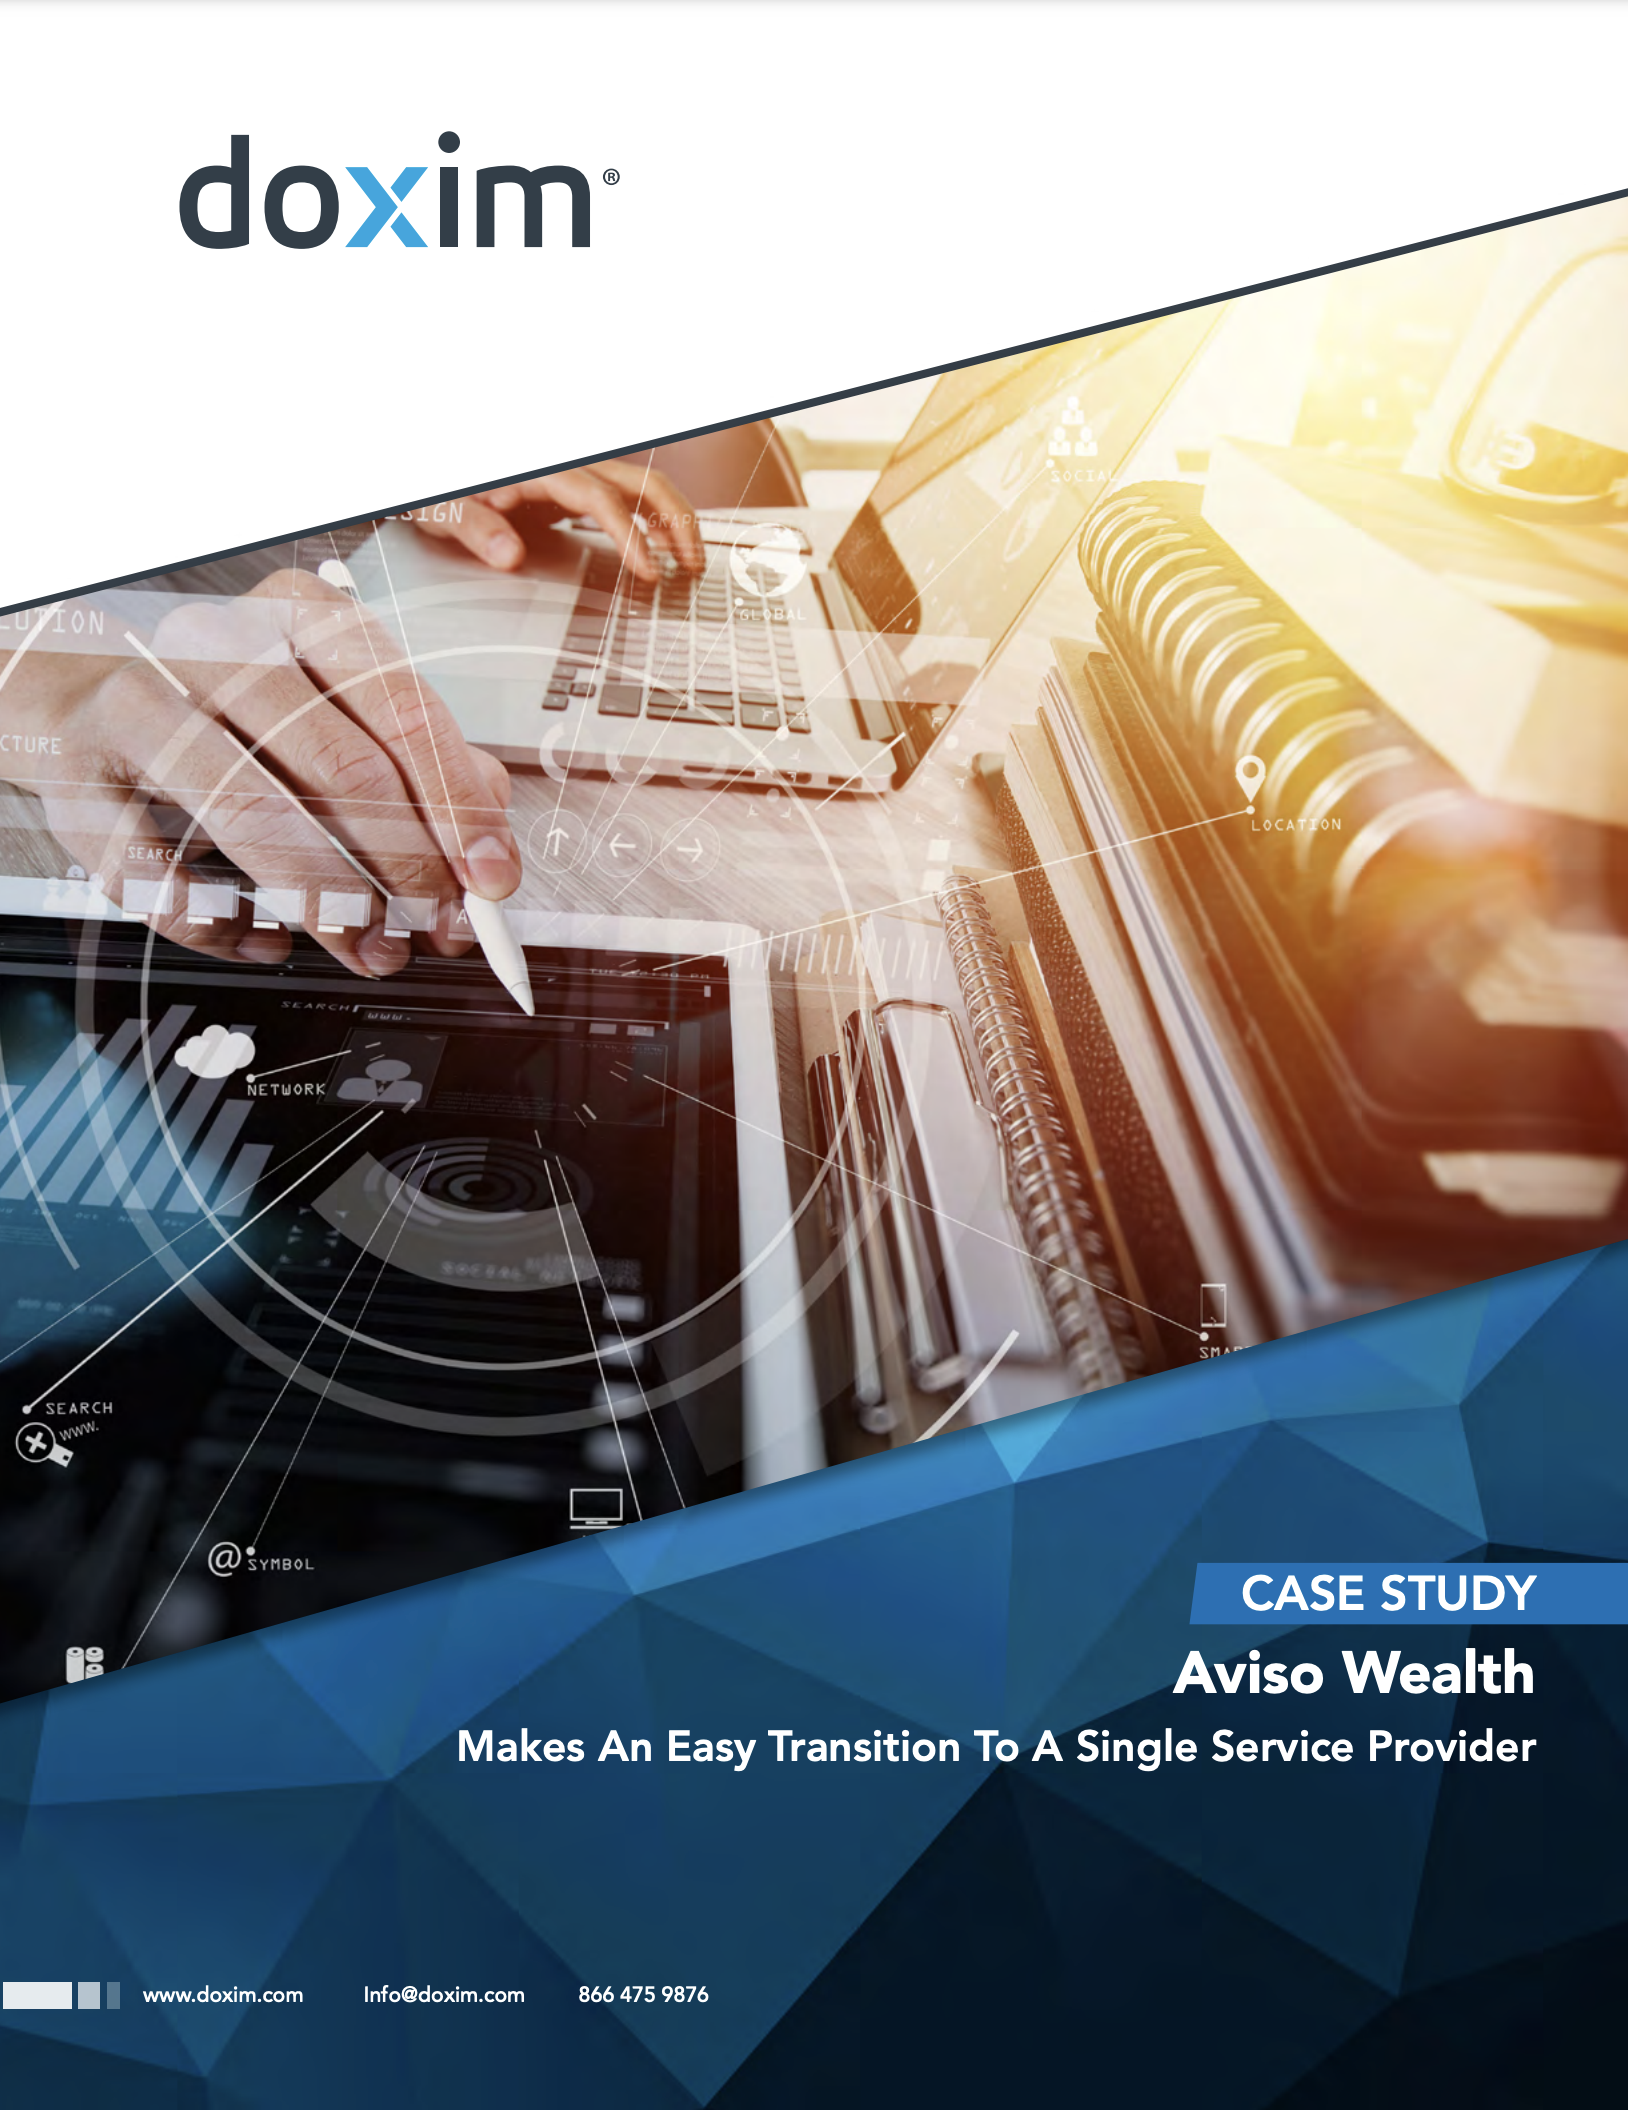 Case Study: Aviso Wealth Makes An Easy Transition To A Single Service Provider